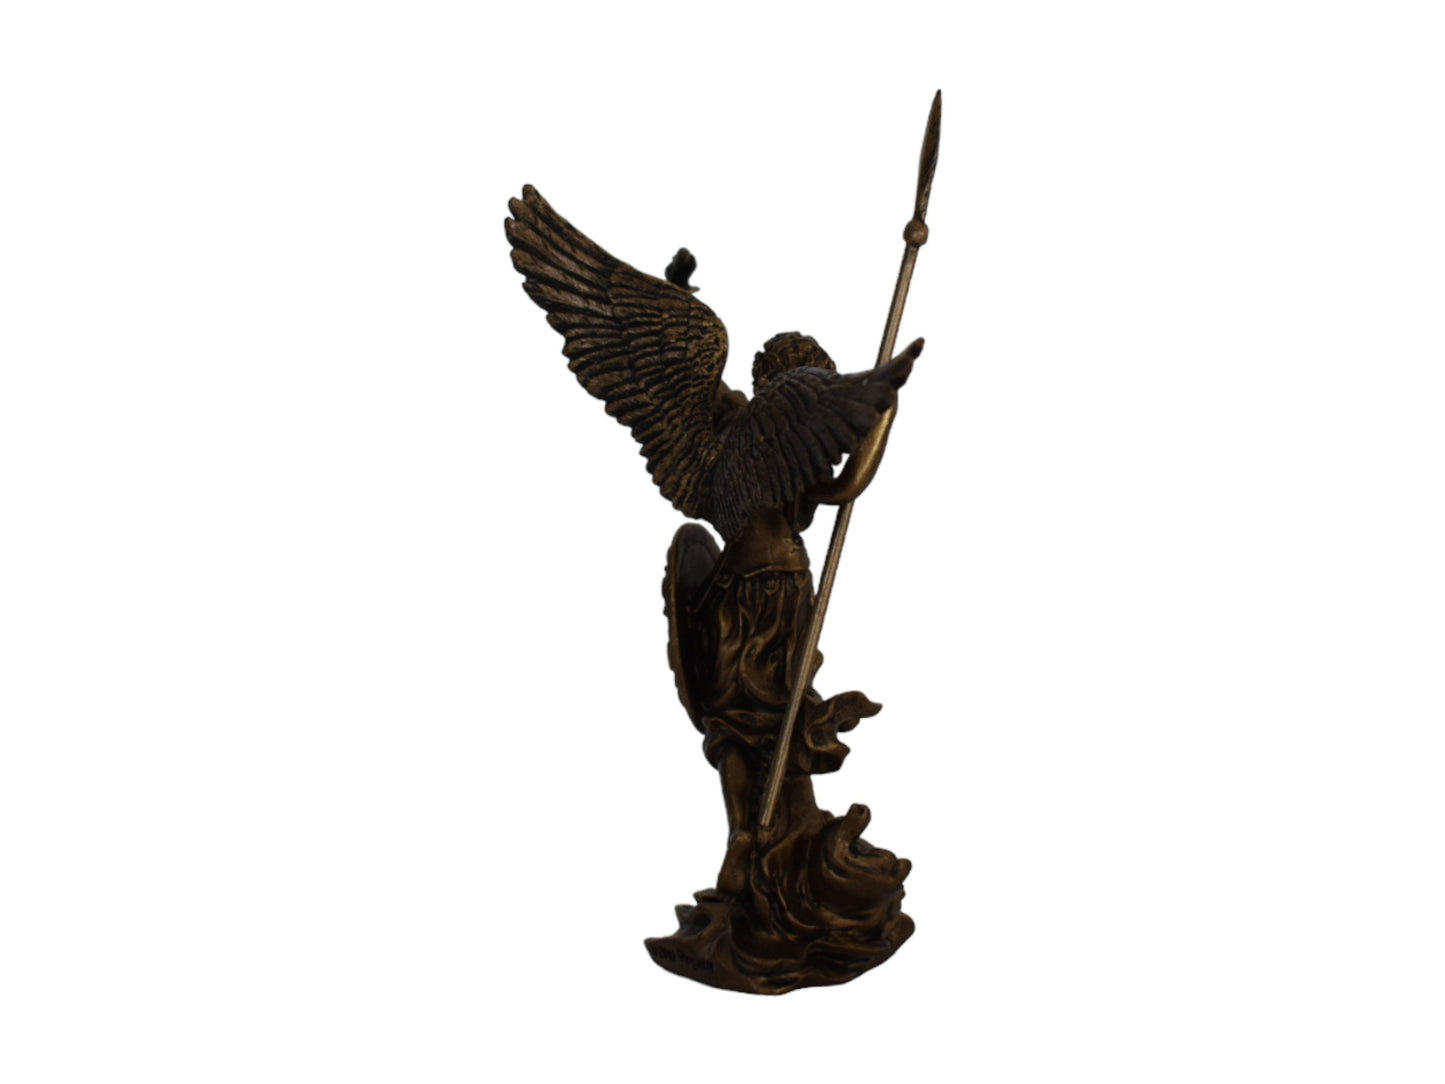 Uriel - Master of Knowledge - Archangel of Wisdom - Stands at the Gate of Eden with a fiery Sword - Cold Cast Bronze Resin